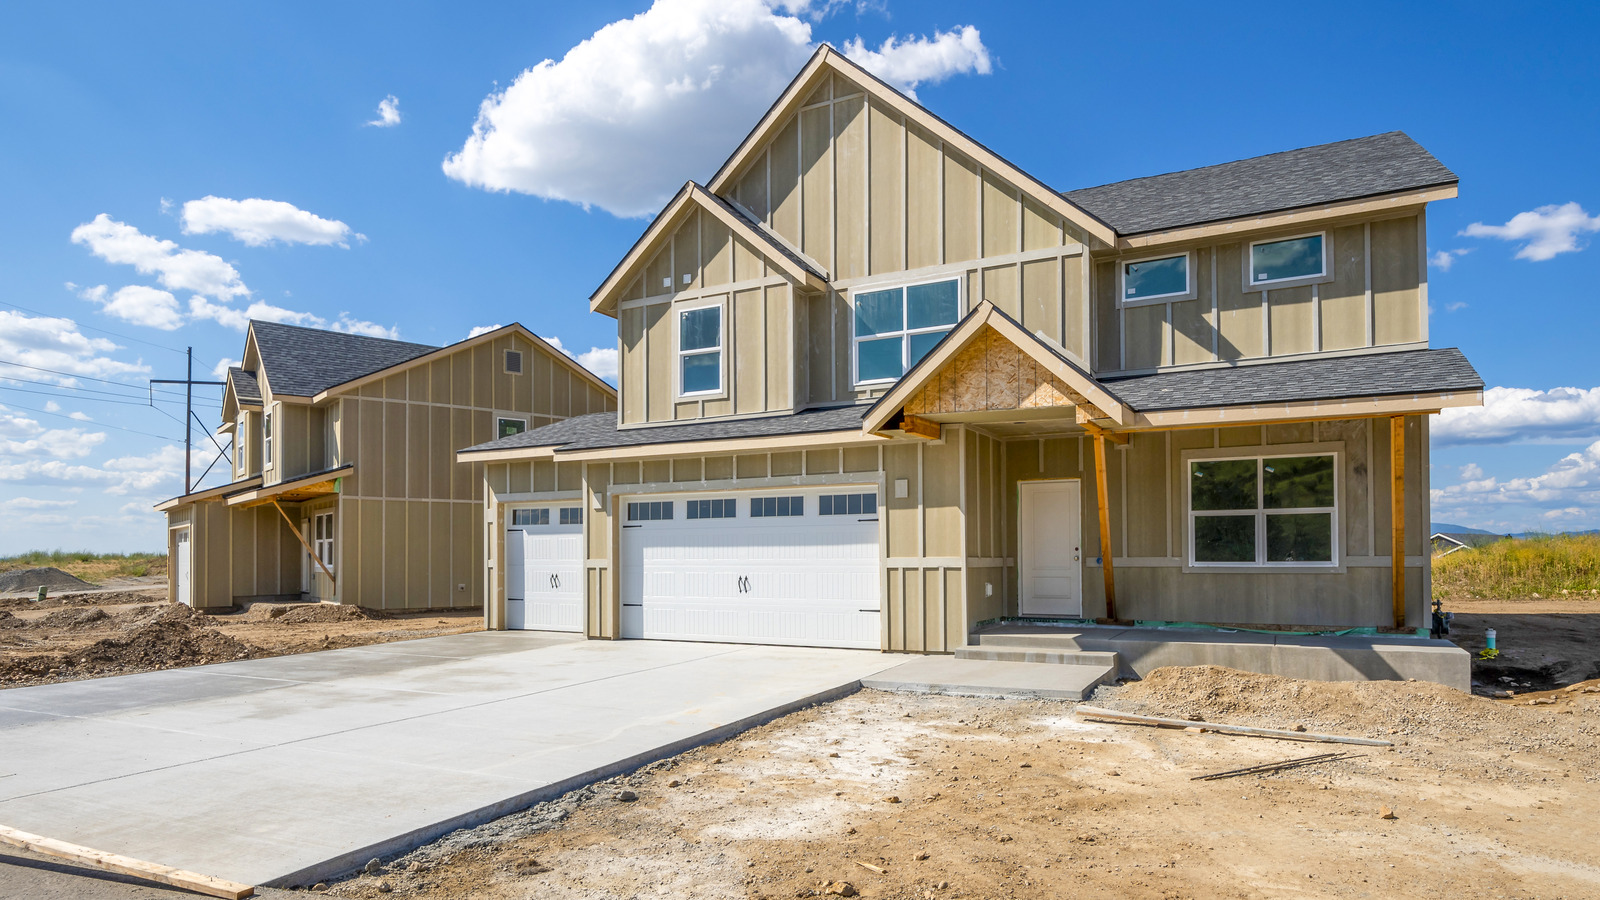 What To Know About Builder Incentives When Buying A New Construction Home